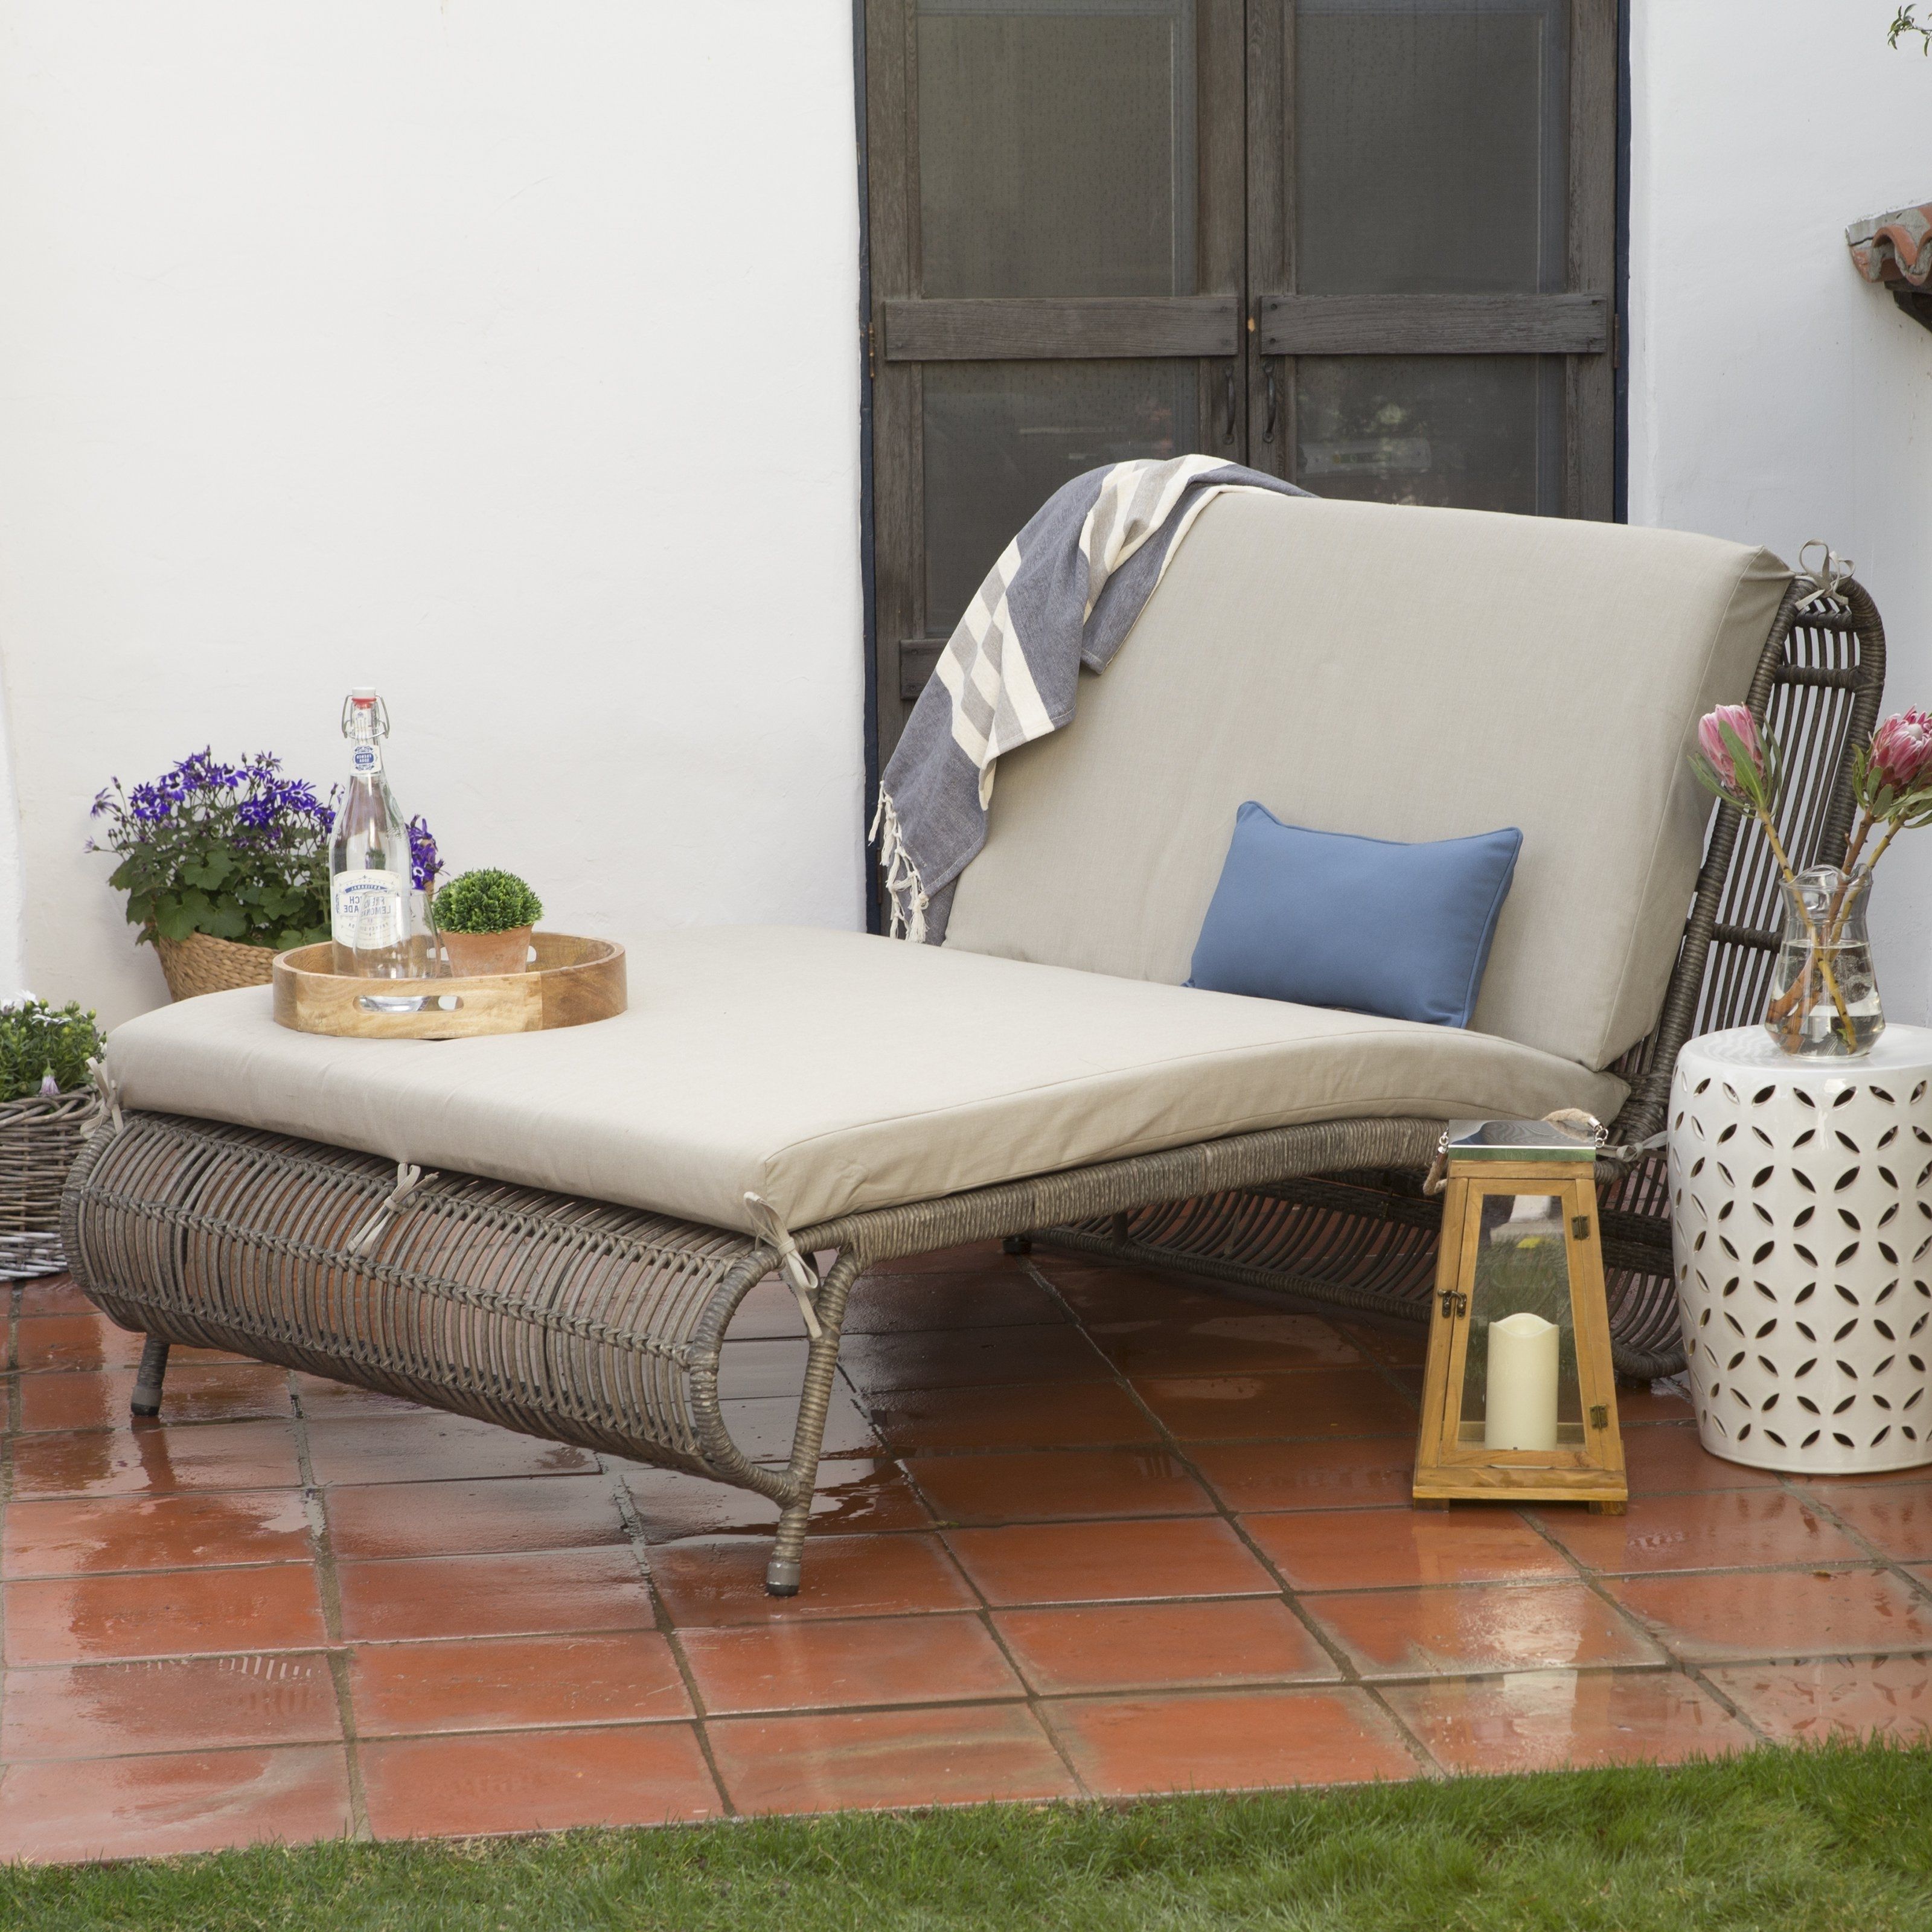 Fashionable Belham Living Batiki Sun Bed Double Chaise Lounge With Cushion Intended For Chaise Lounge Beds (View 2 of 15)